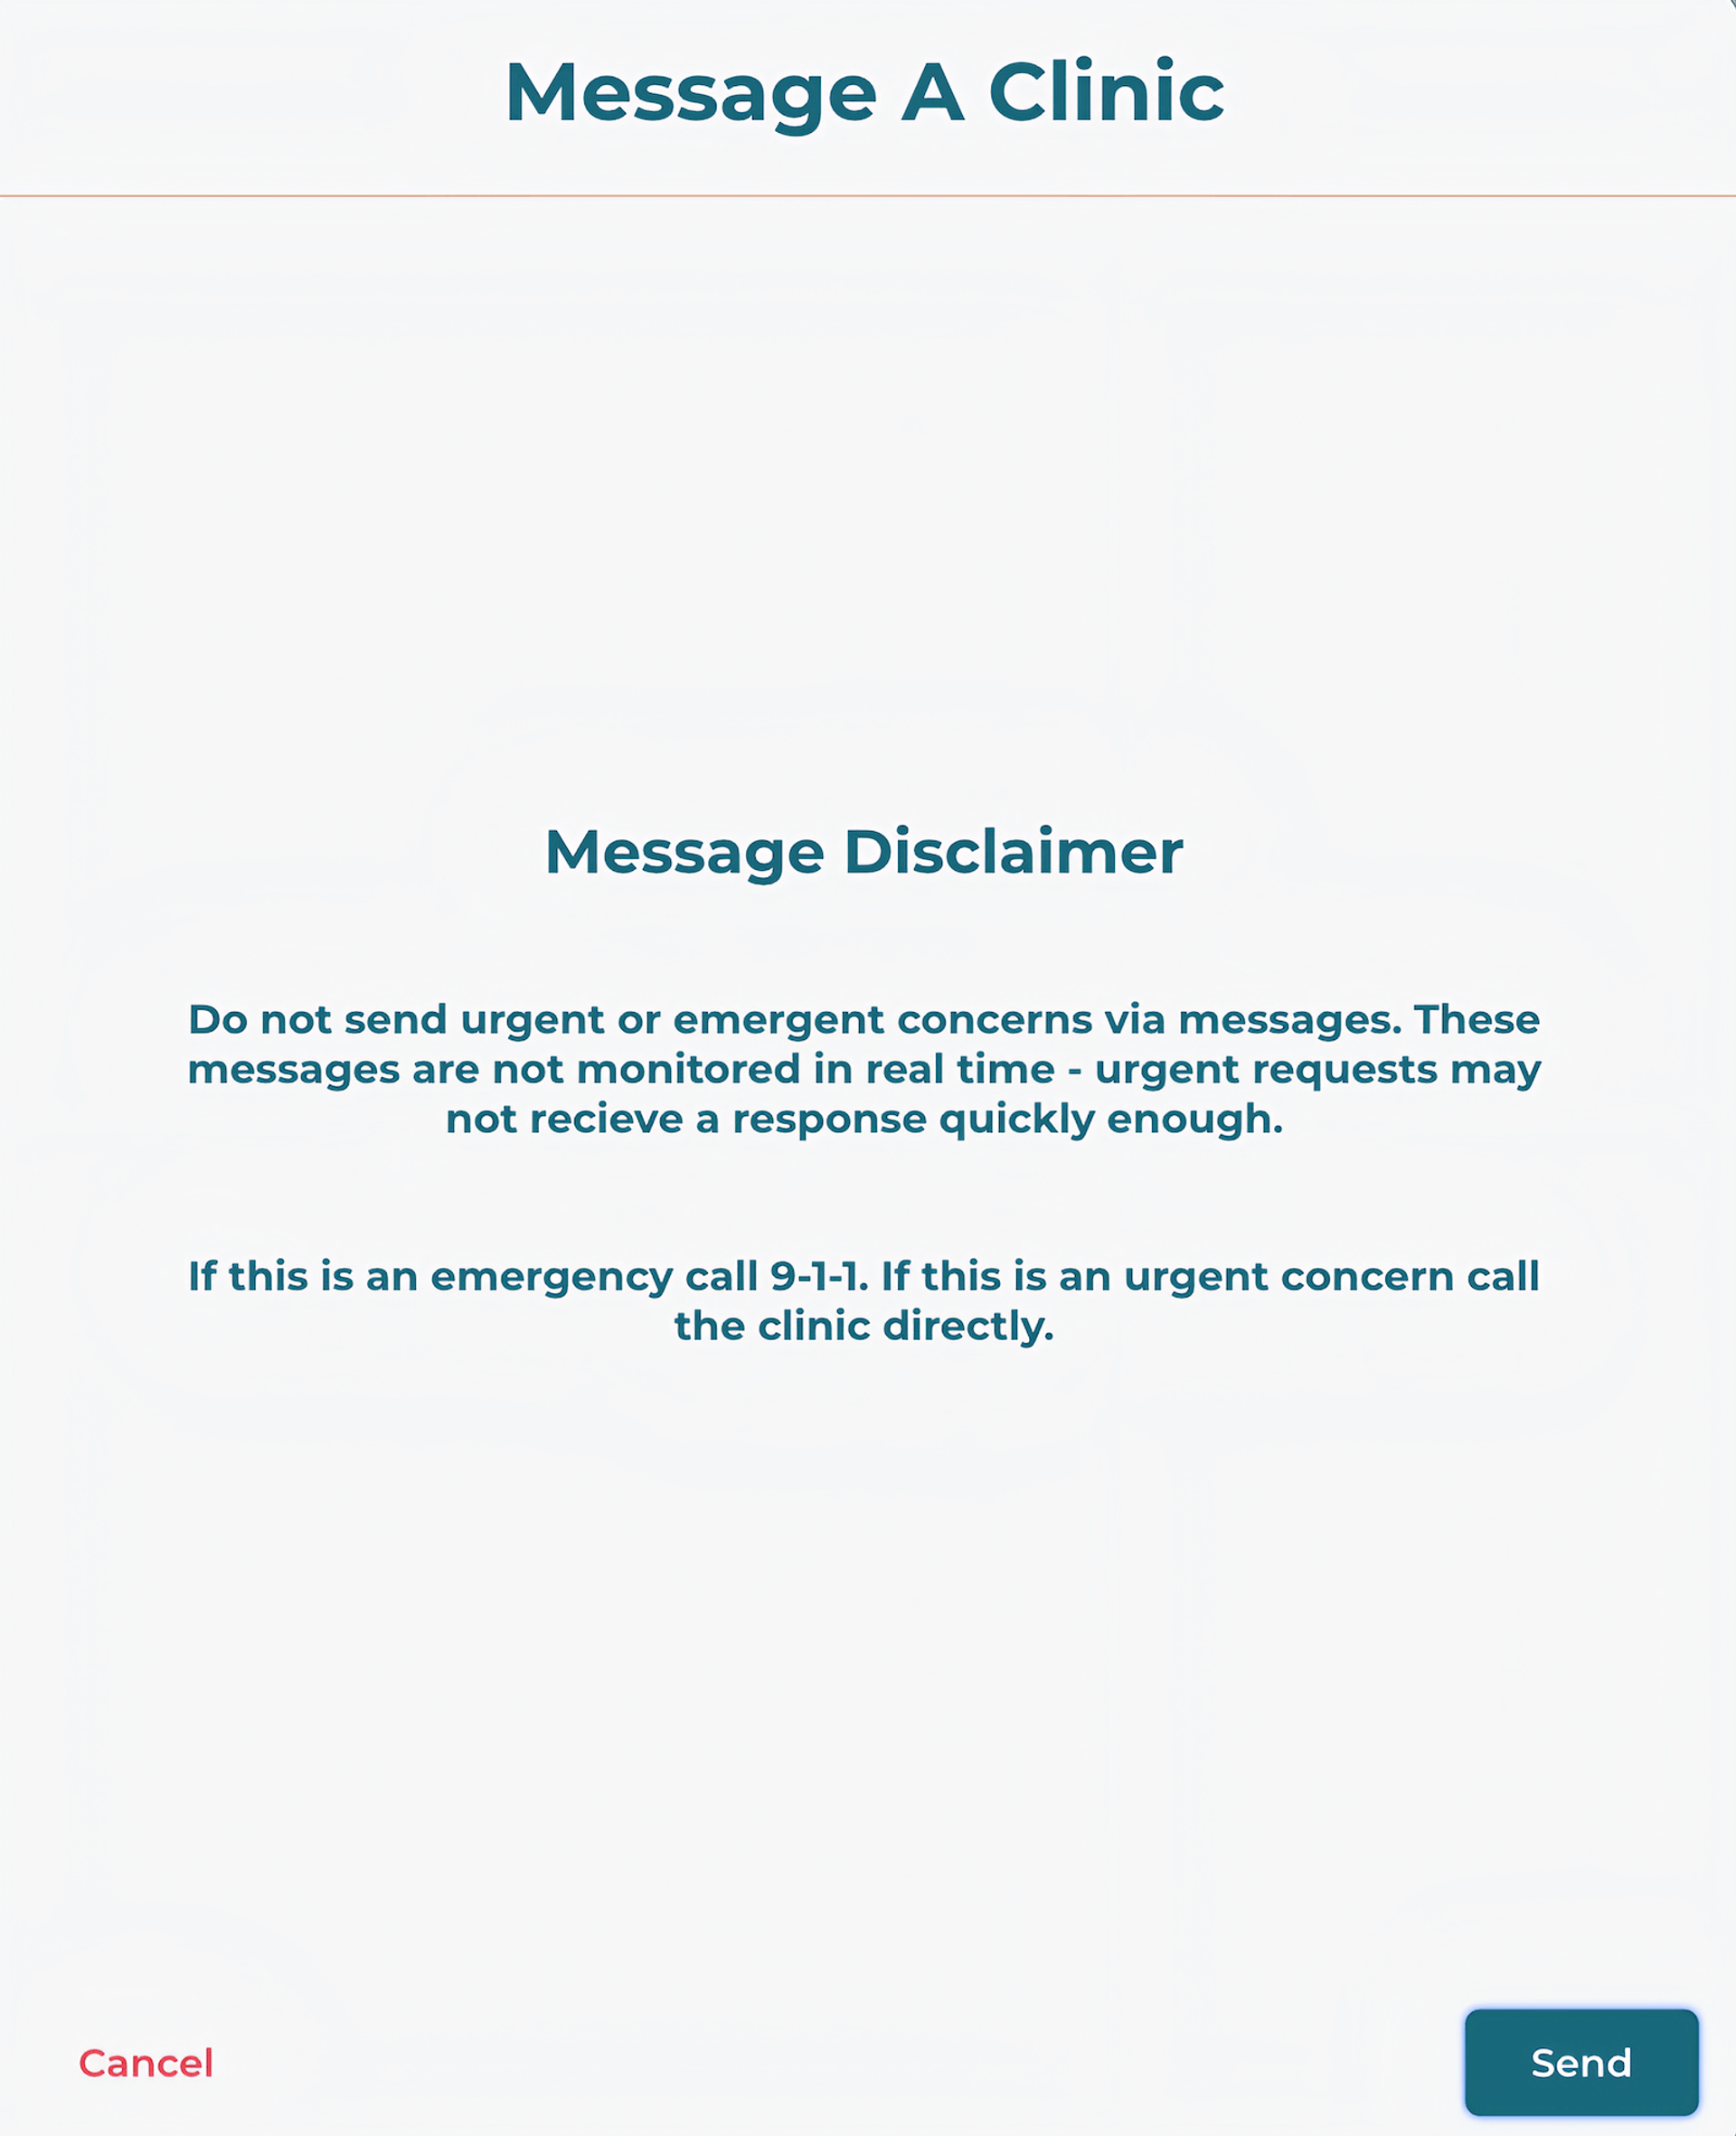 Message window with the text 'Message Disclaimer: Do not send urgent or emergent concerns via messages. These messages are not monitored in real time - urgent requests may not receive a response quickly enough'